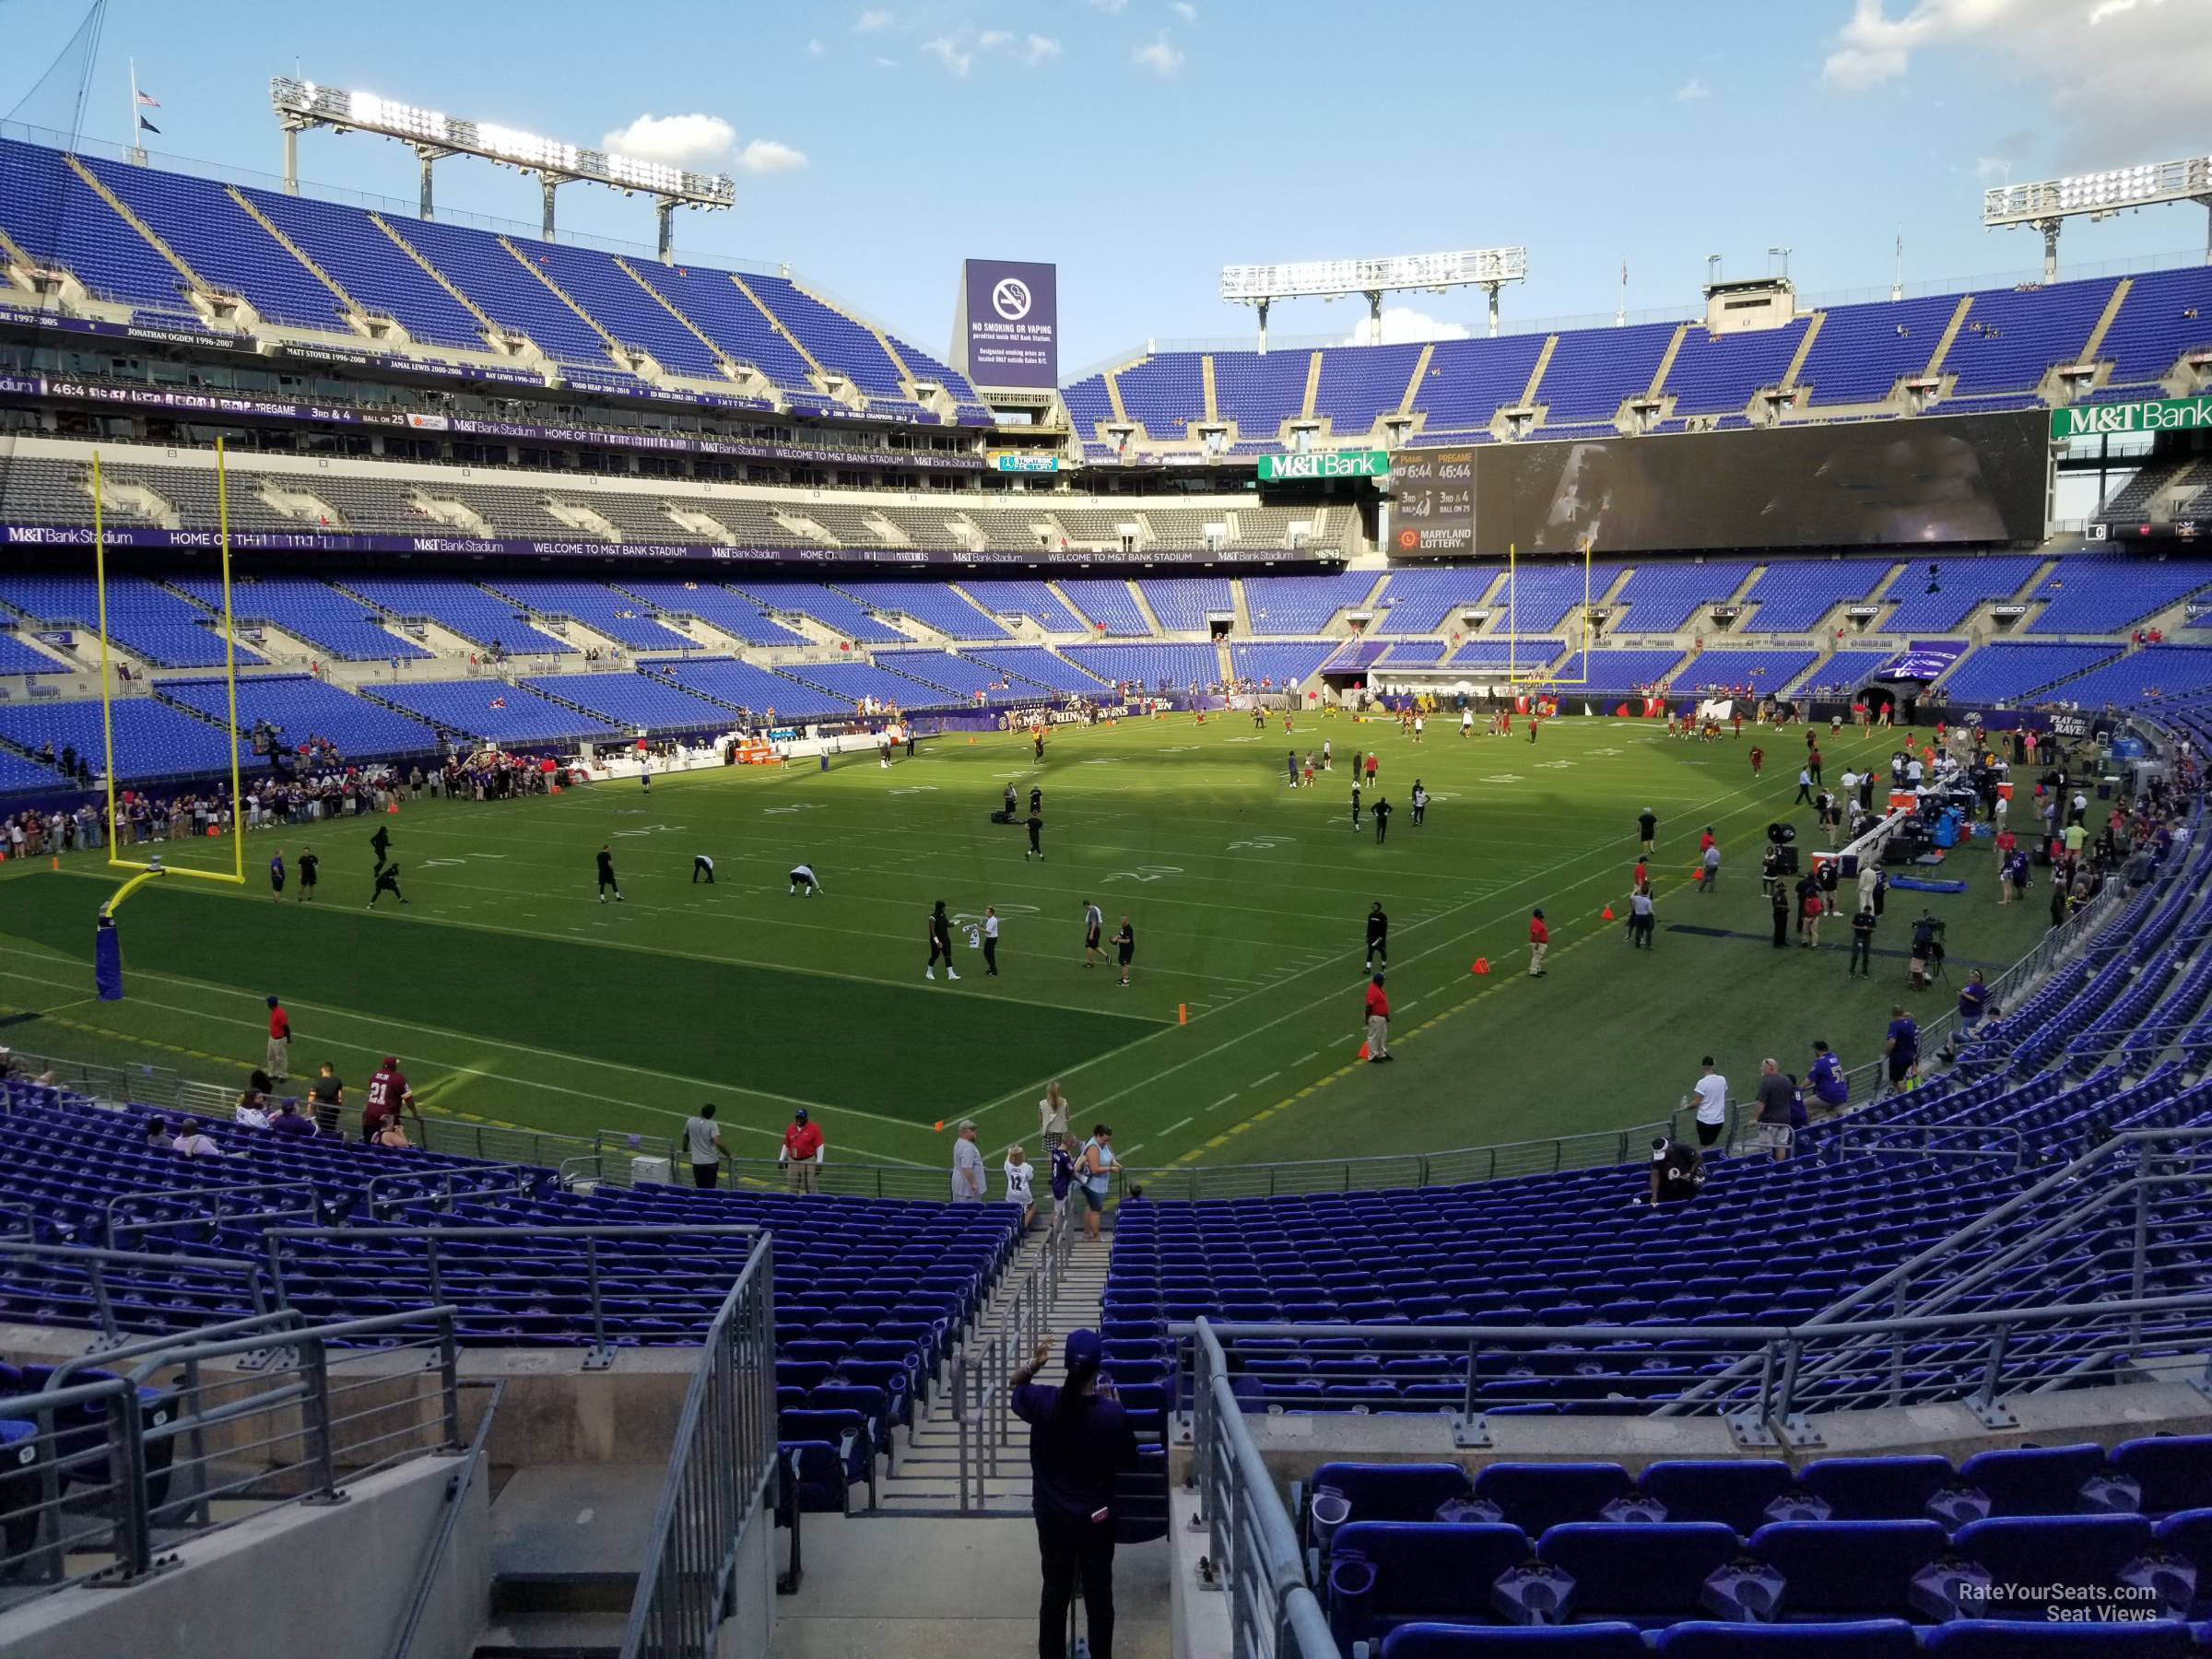 section 135, row 28 seat view  for football - m&t bank stadium